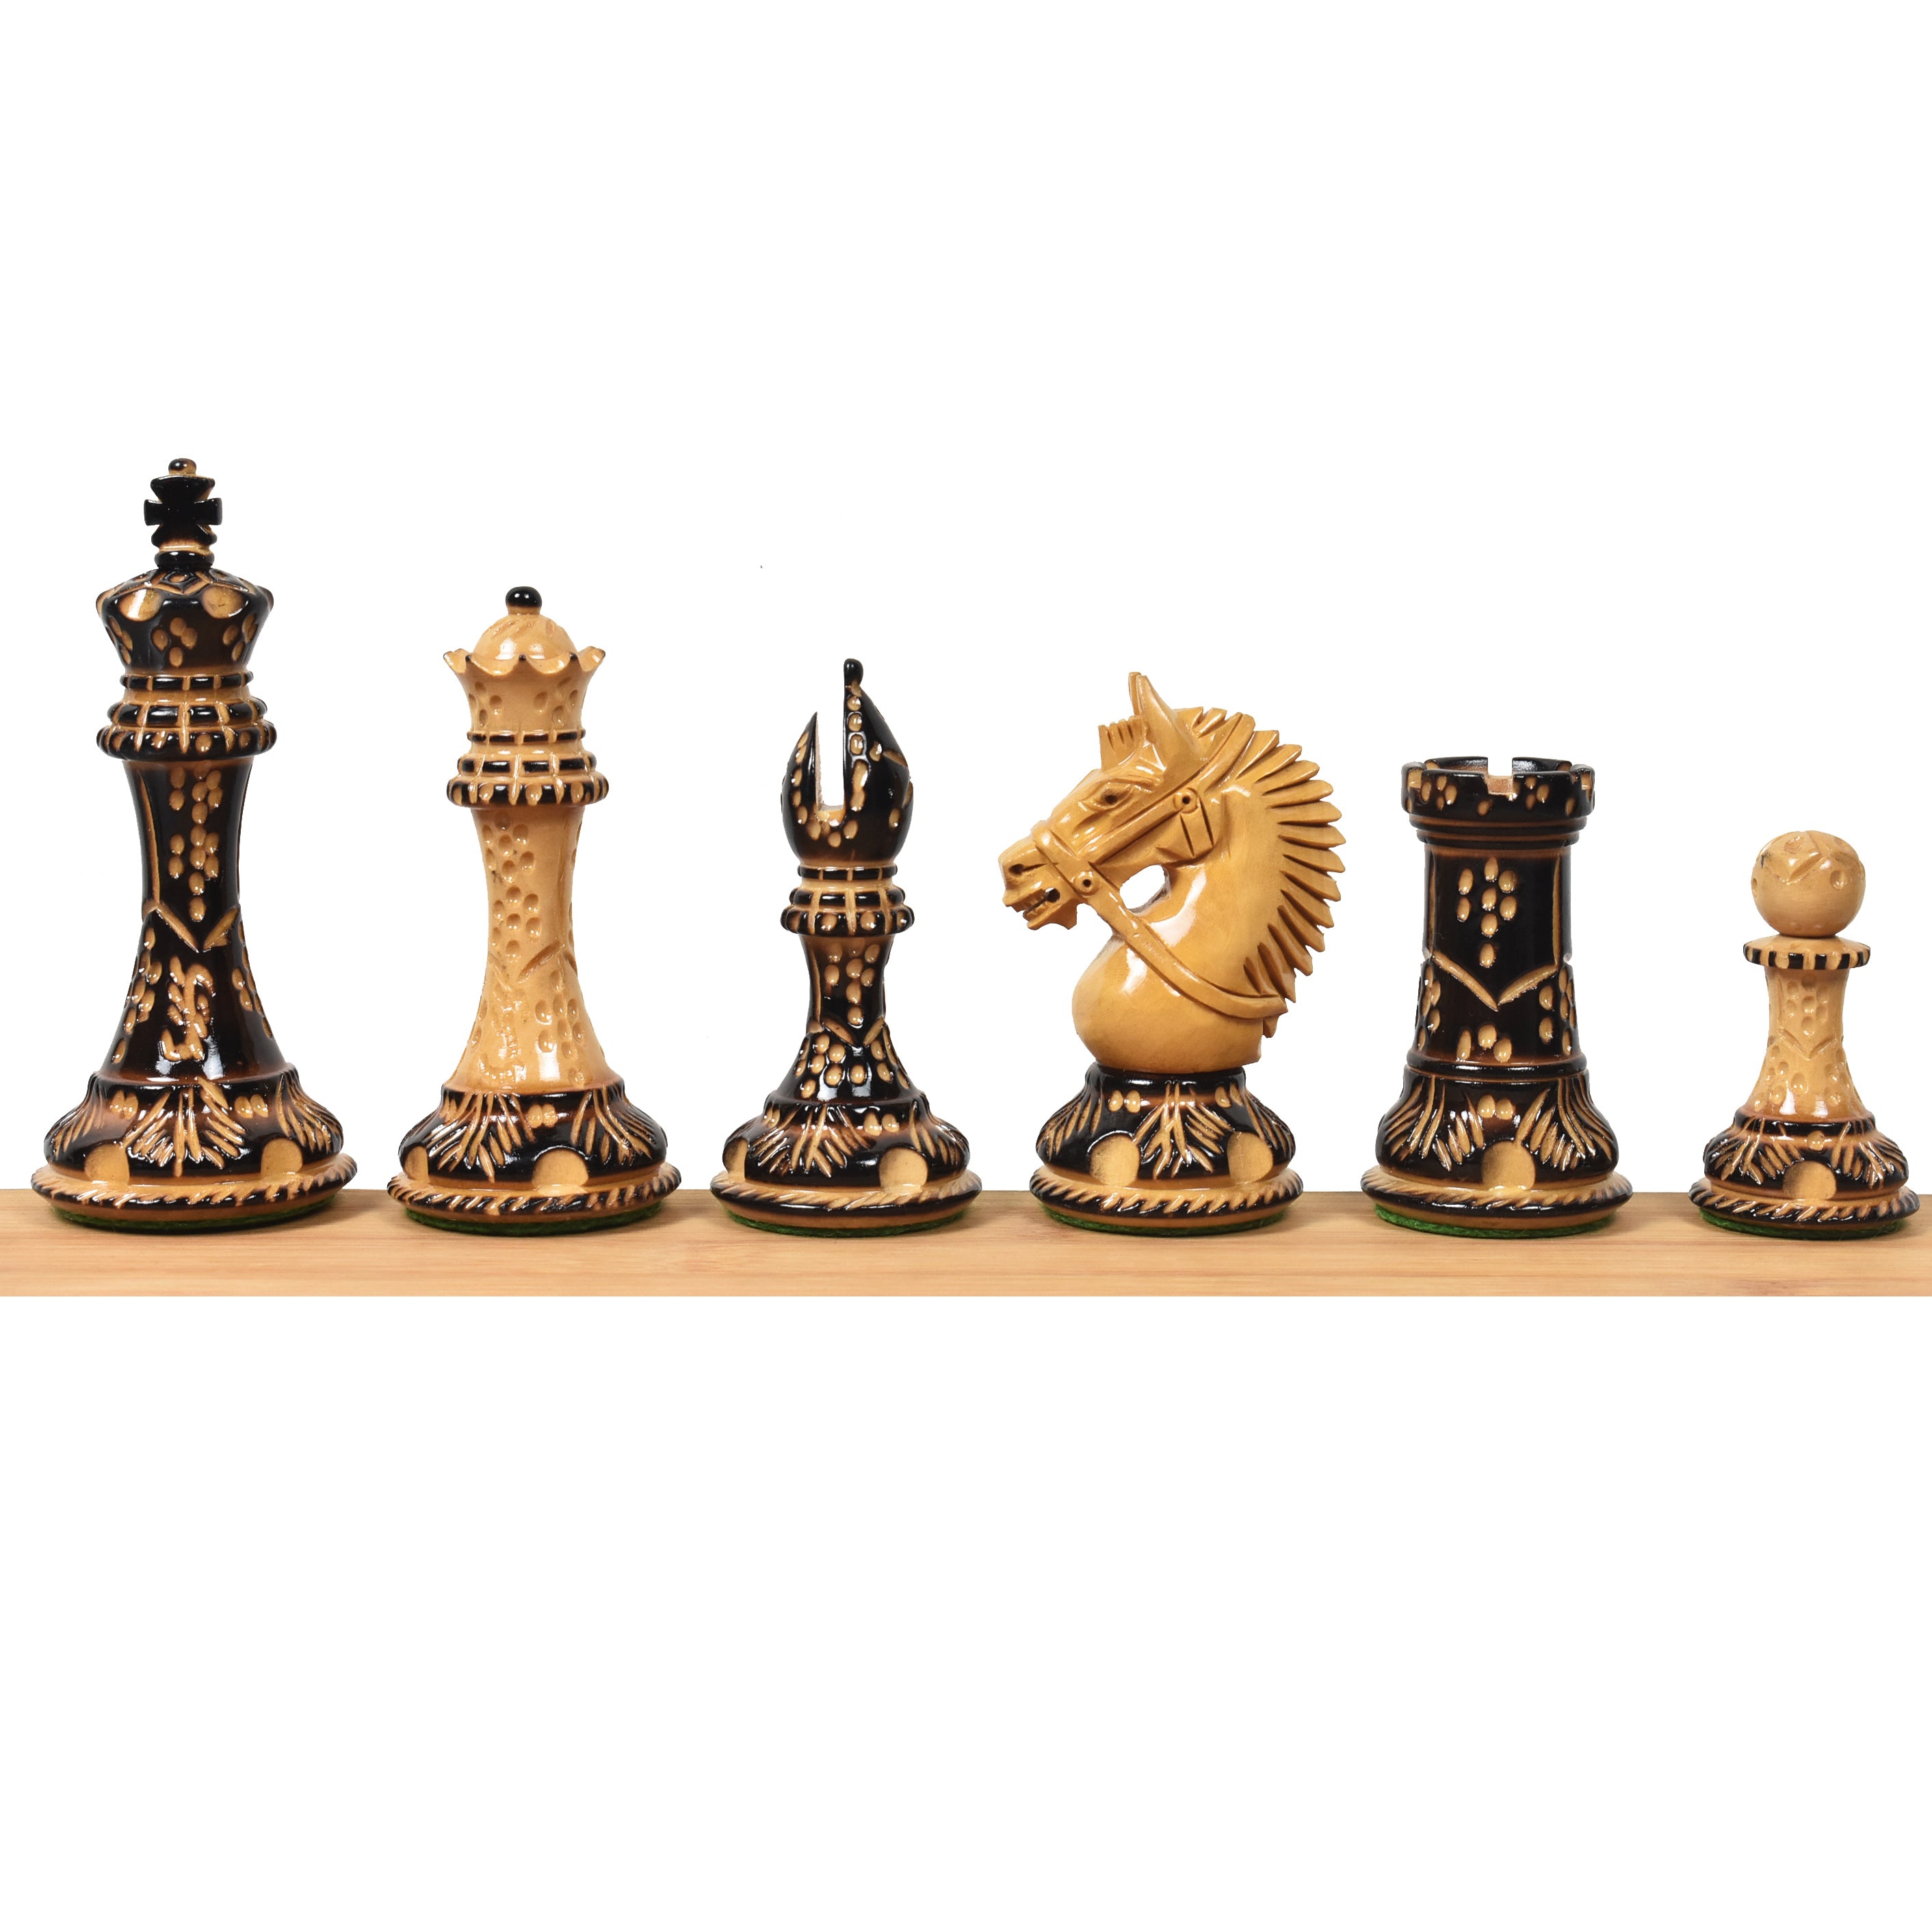 Hand-Crafted Wooden Luxury Chess Sets for Sale - Chess Forums 